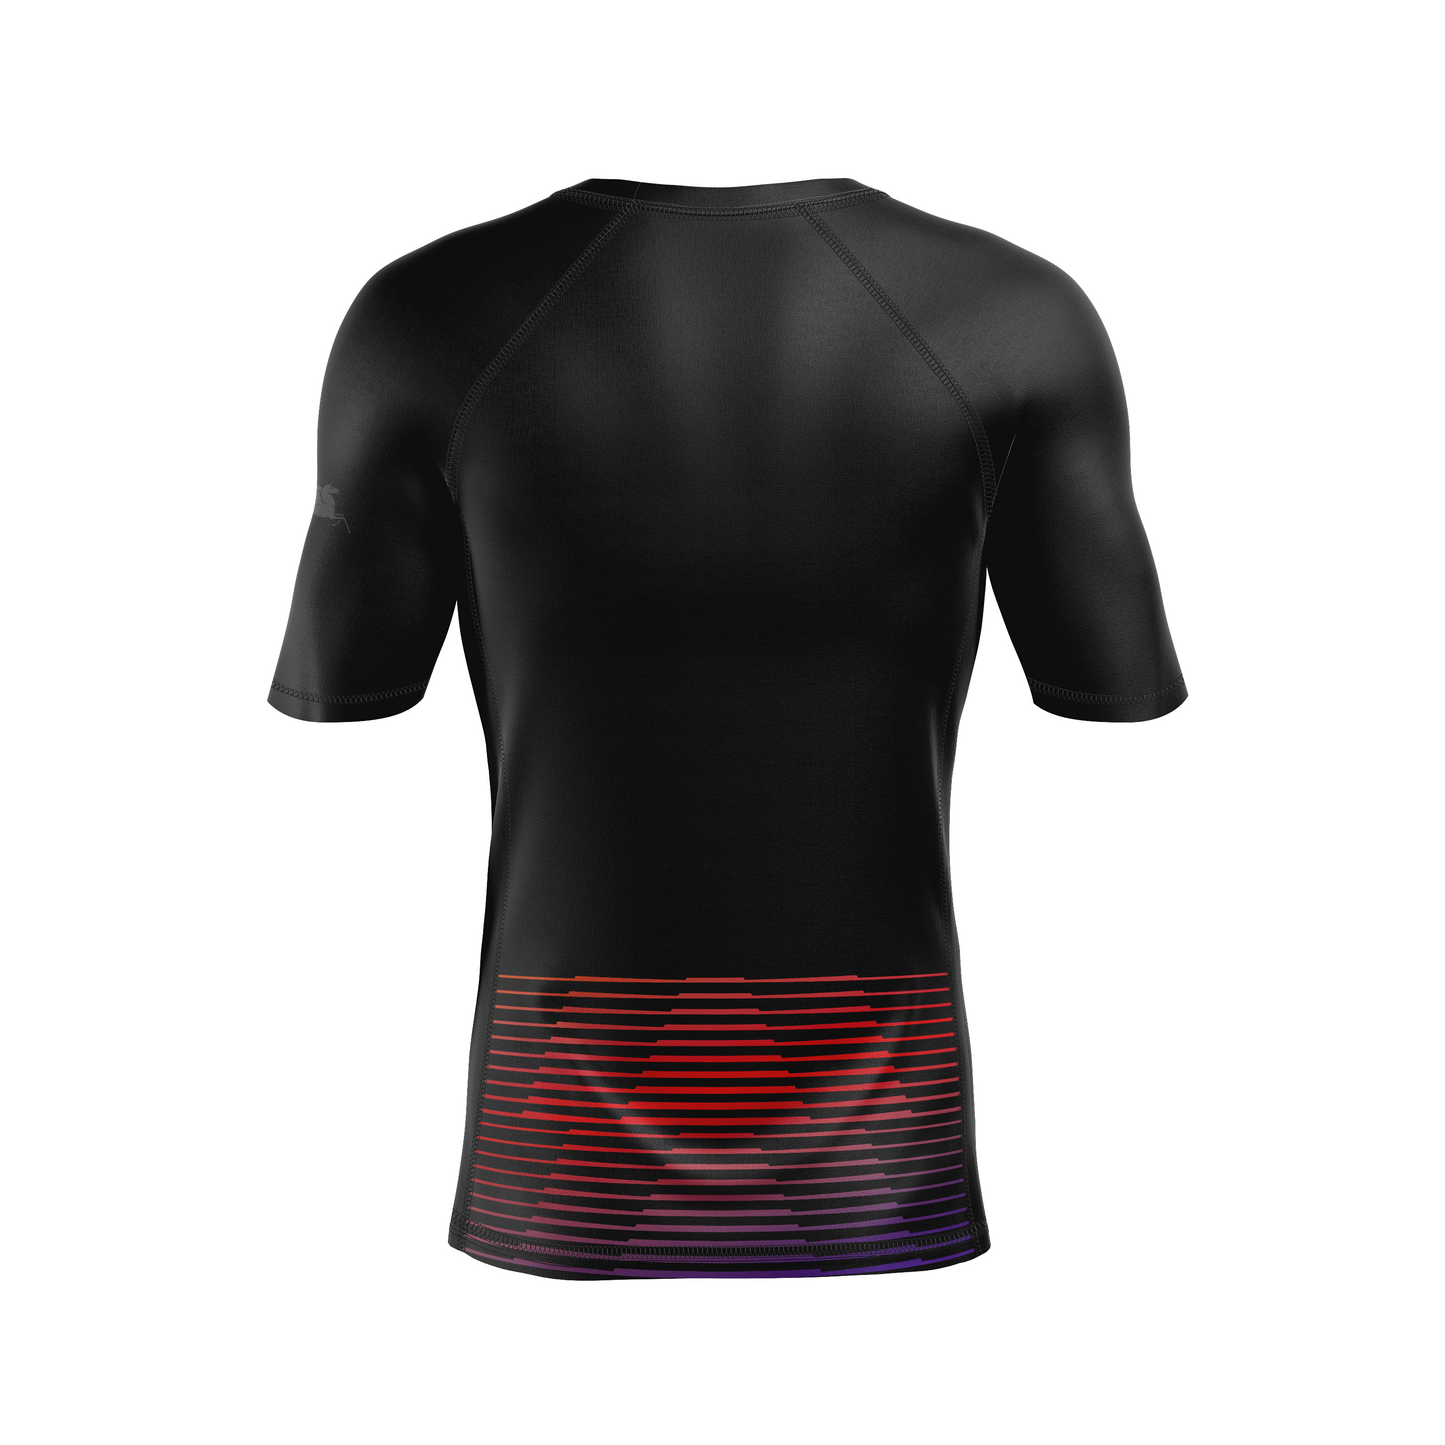 CCFC men's rash guard Reapers, black with purple and red